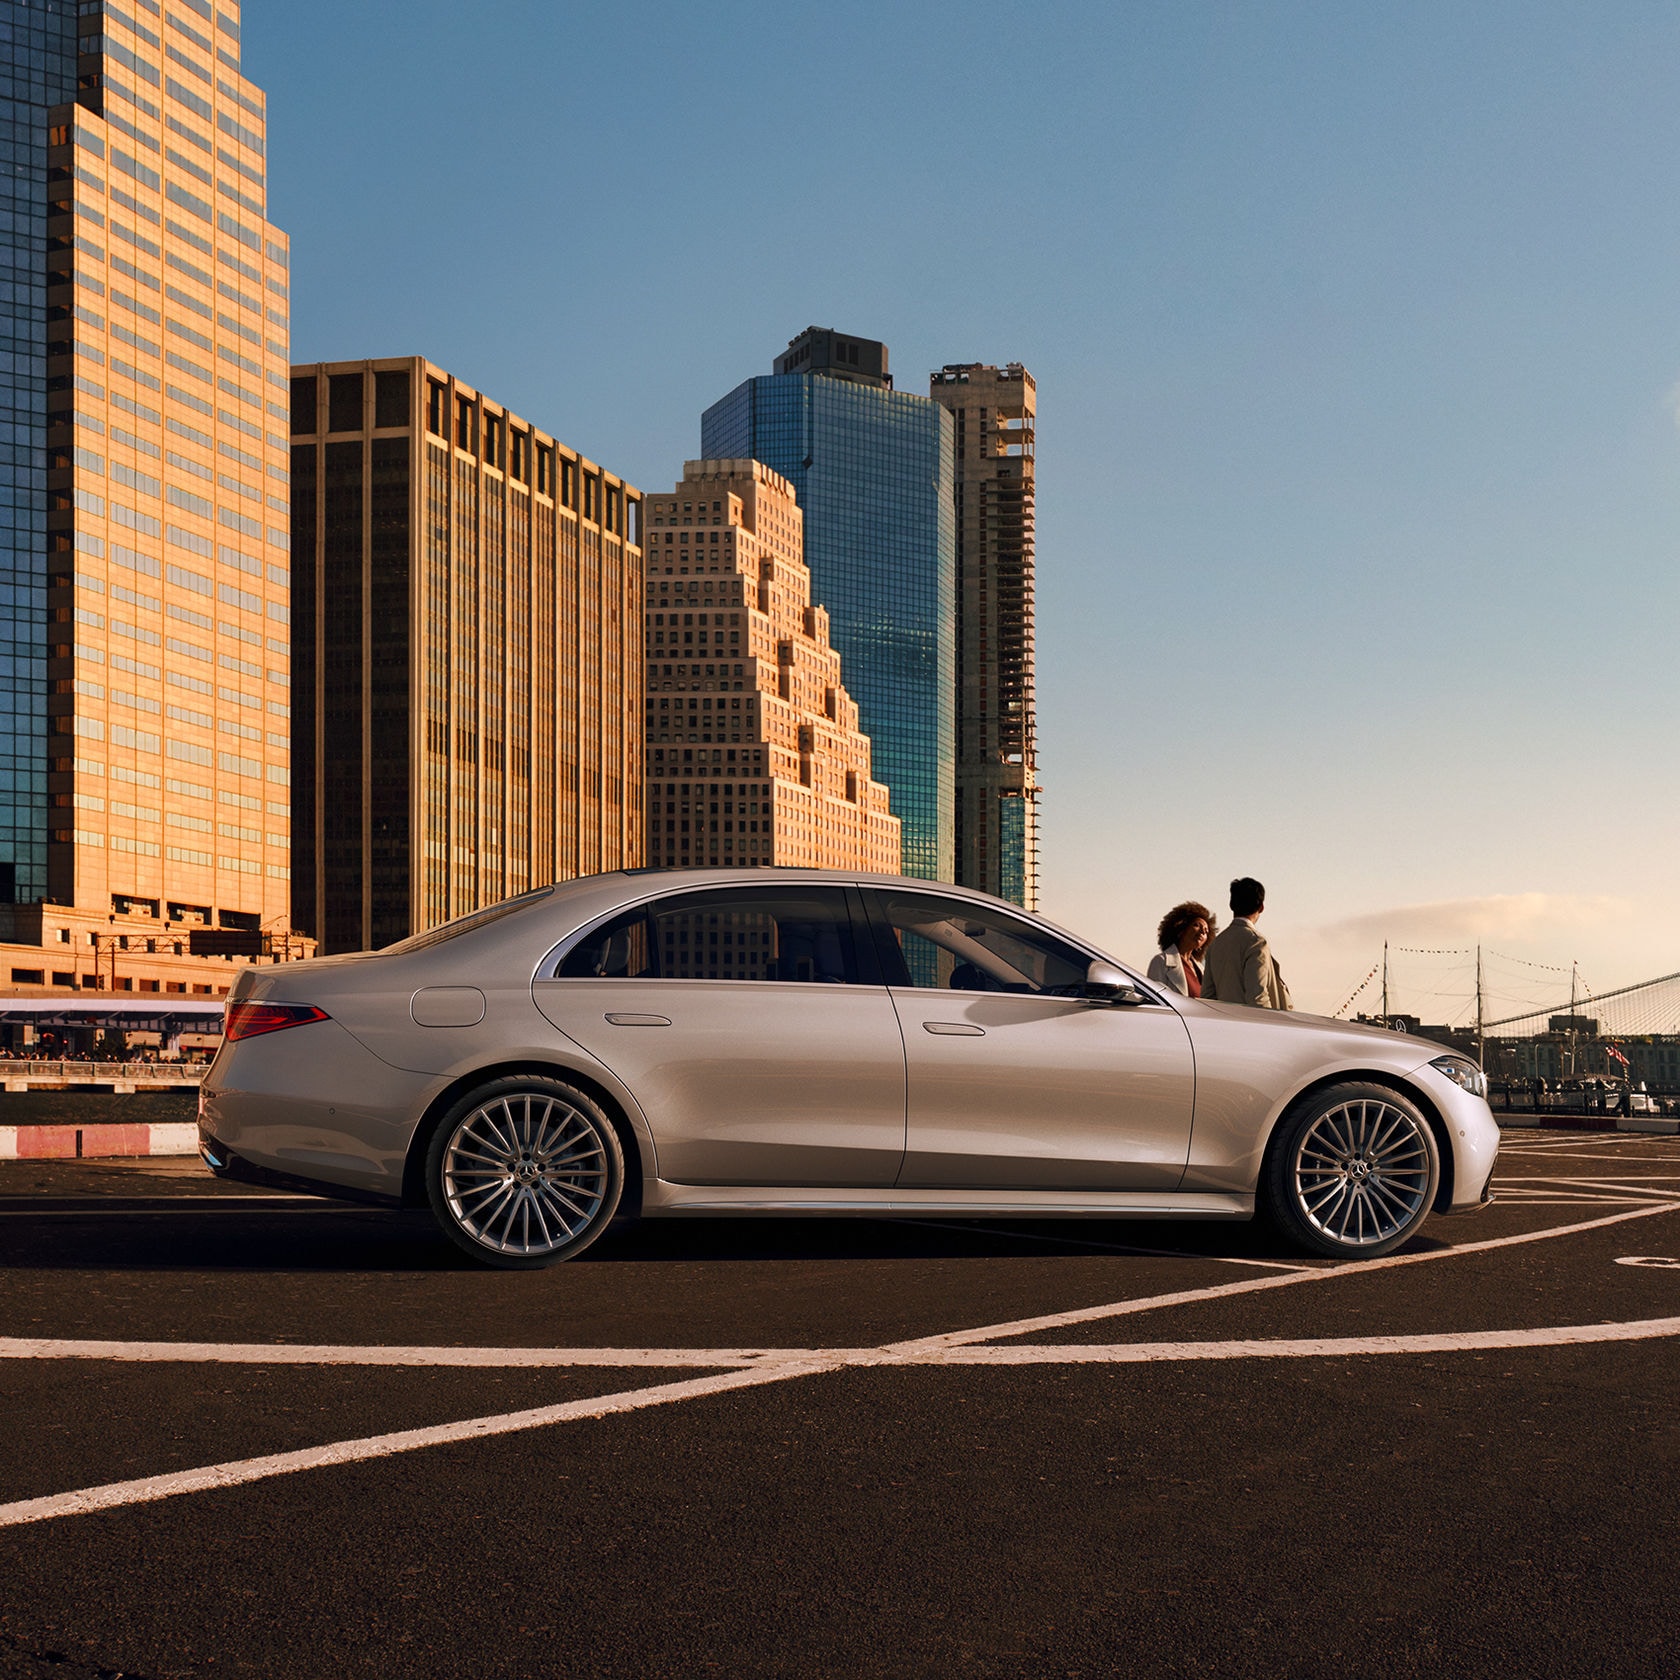 Mercedes-Benz S-Class: Cares for what matters.